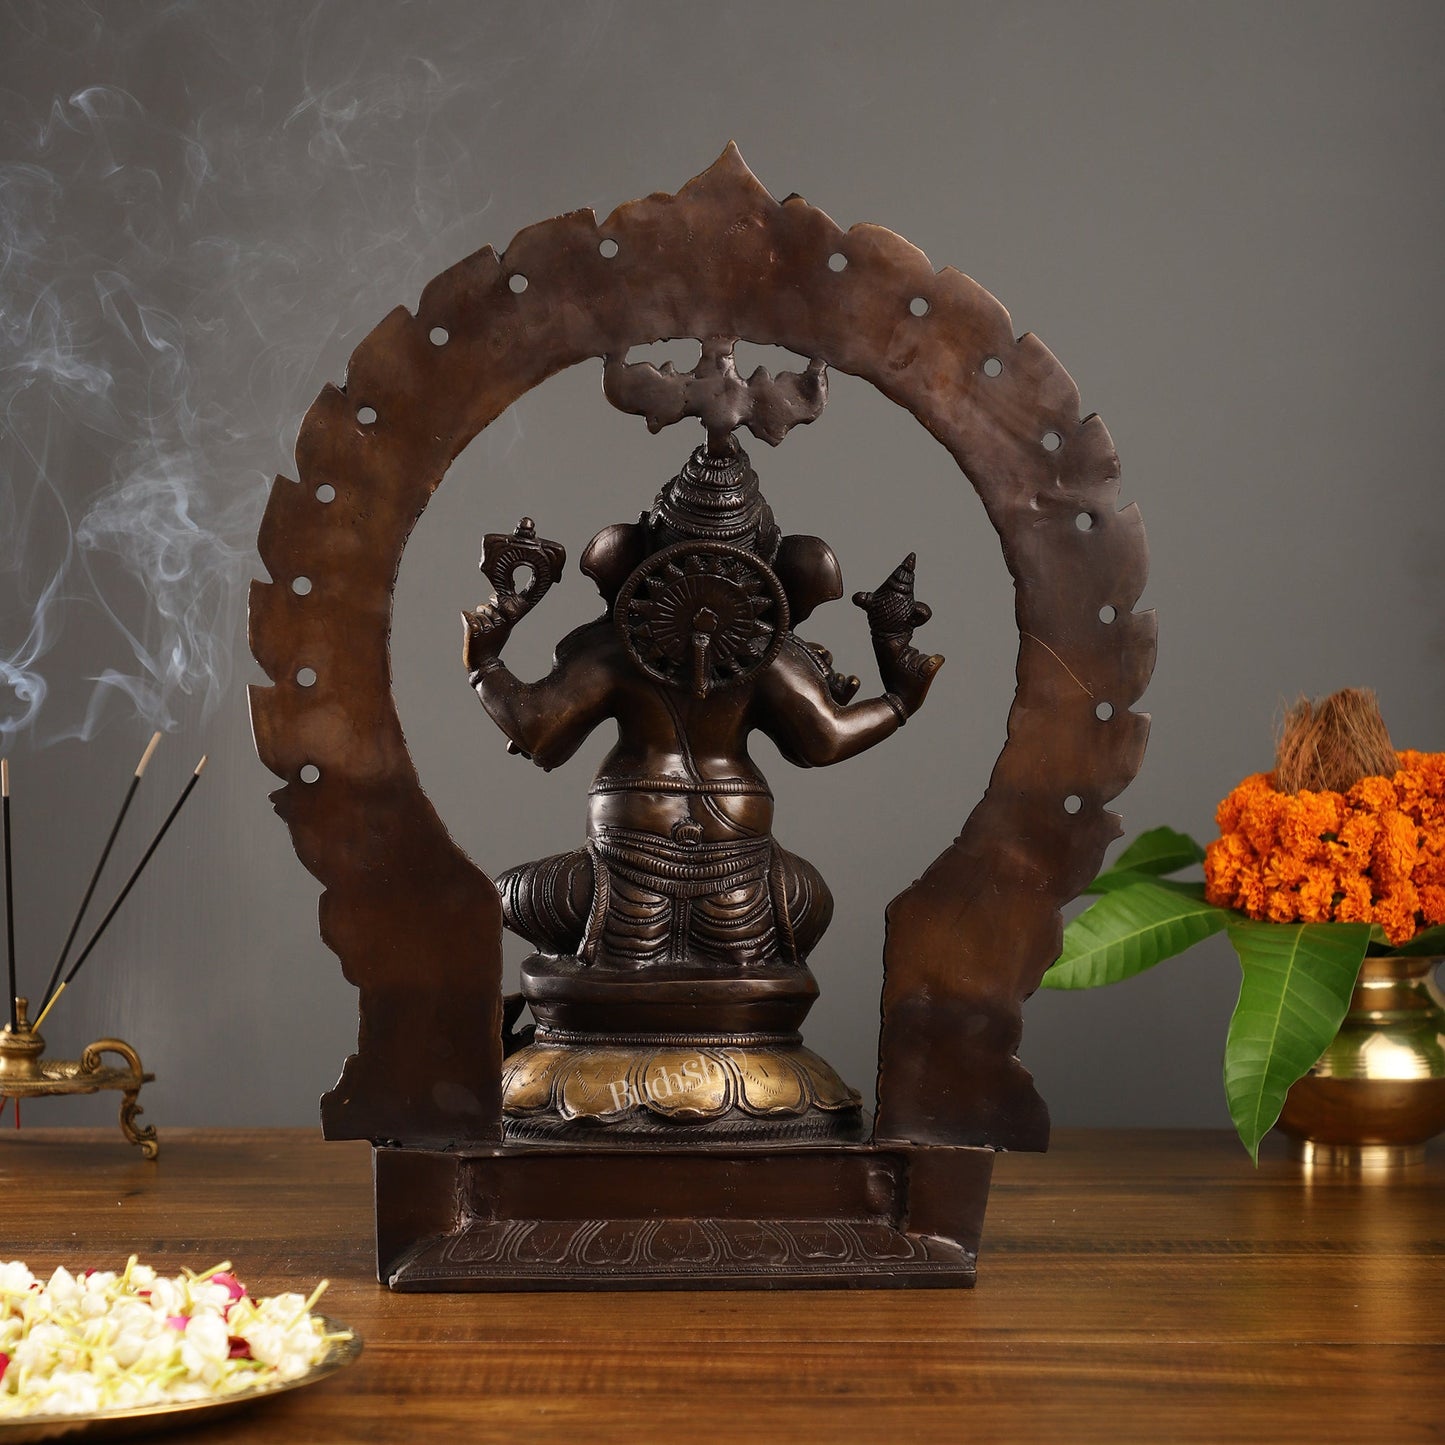 18-Inch Brass Ganapati Idol with Antique Brown Finish and Frame - Budhshiv.com